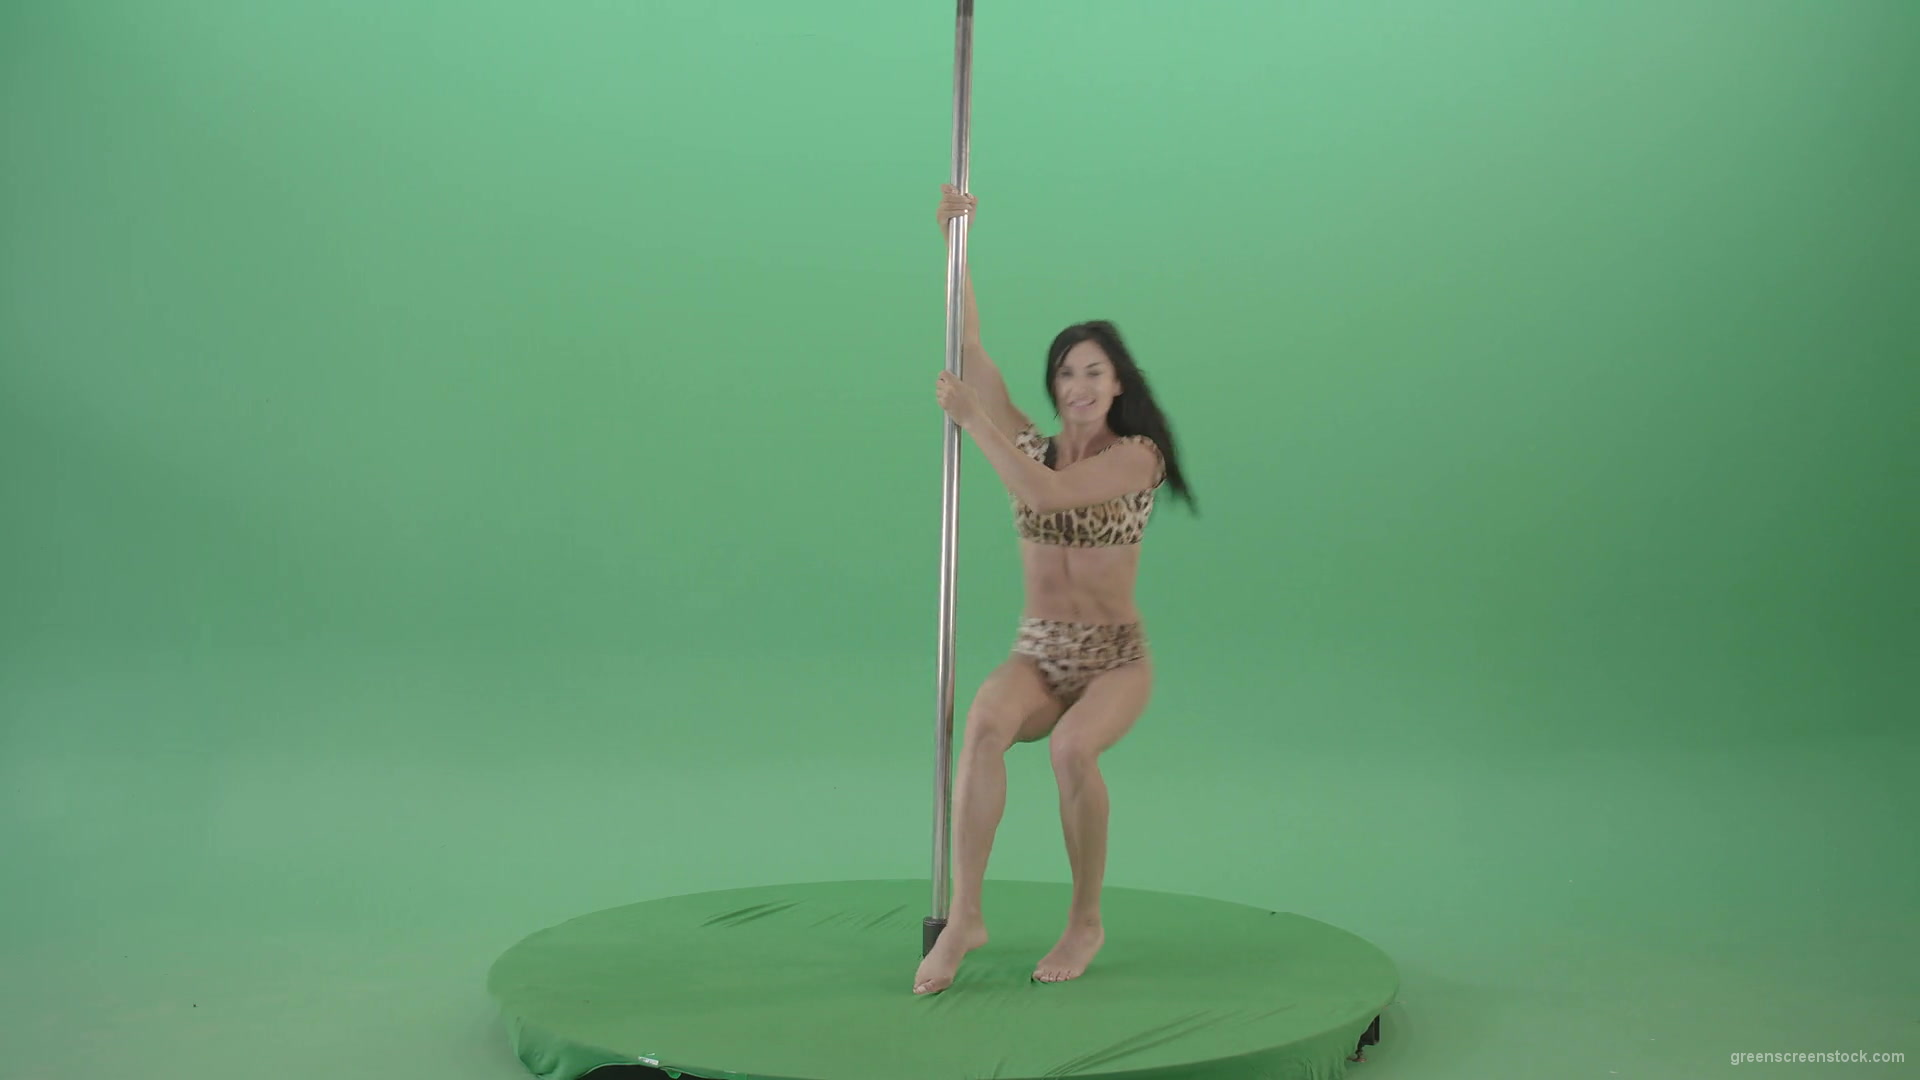 Glamor-girl-in-leopard-underwear-dancing-on-pilon-Pole-dance-and-spinning-isolated-on-Green-Screen-Video-Footage-1920_009 Green Screen Stock